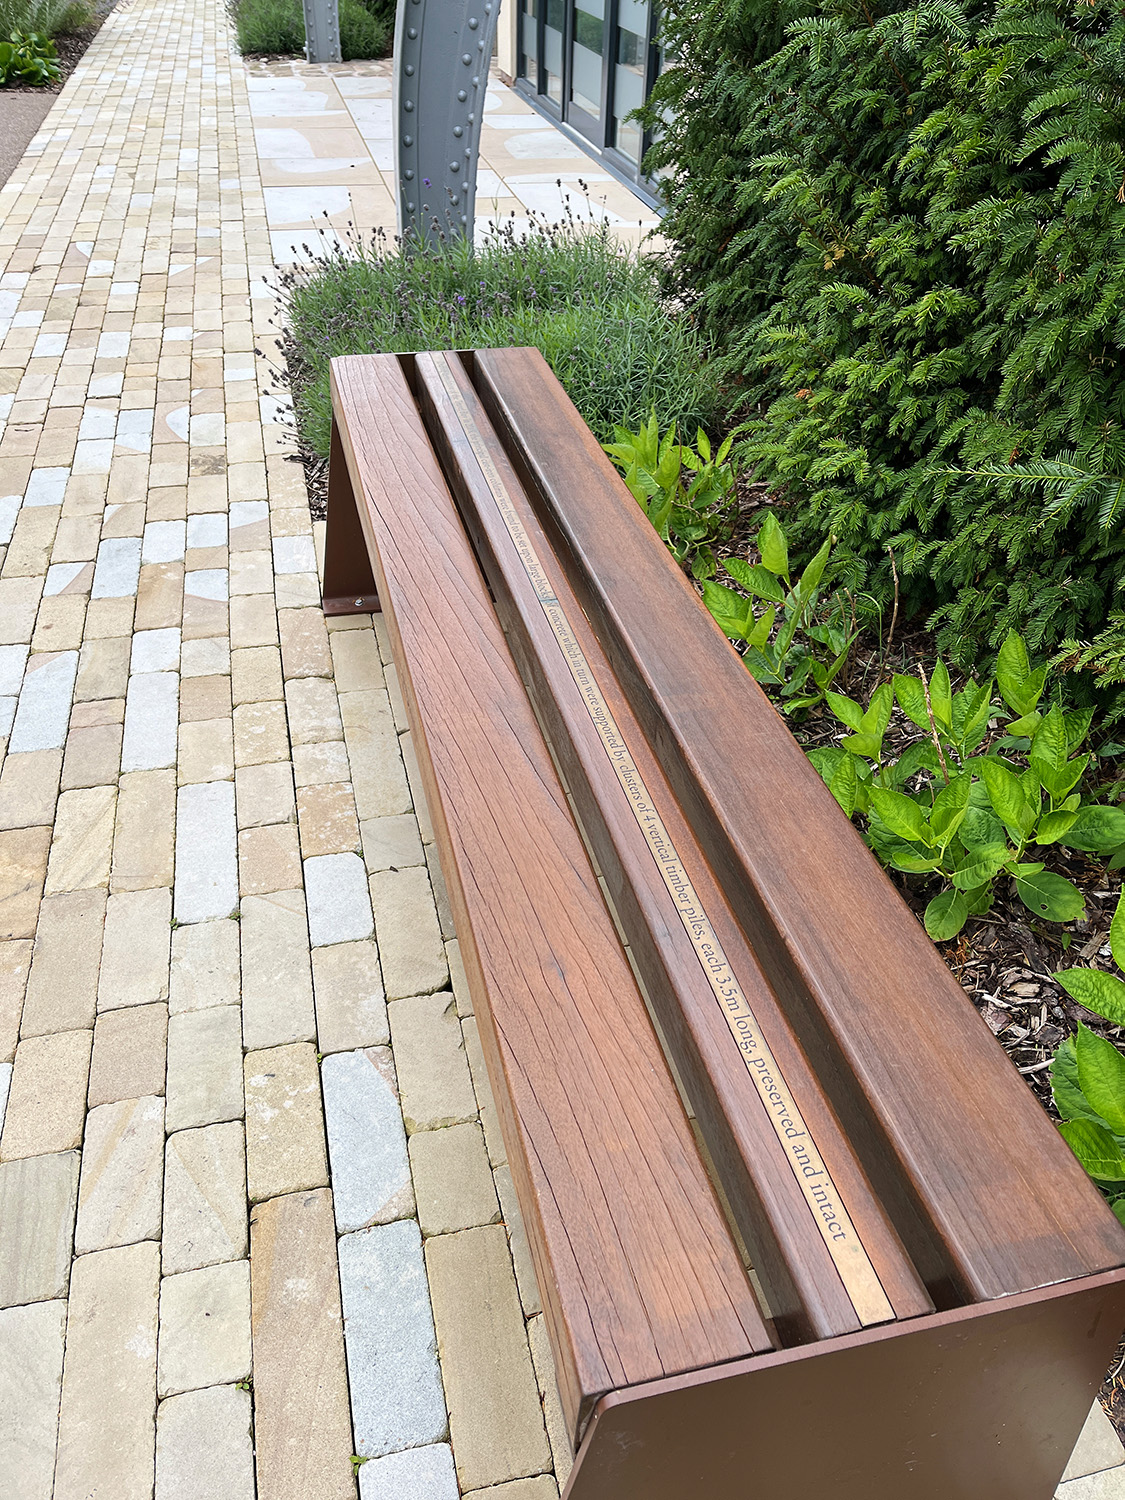 Exterior benches have information about the company and typefaces integrated into their design.